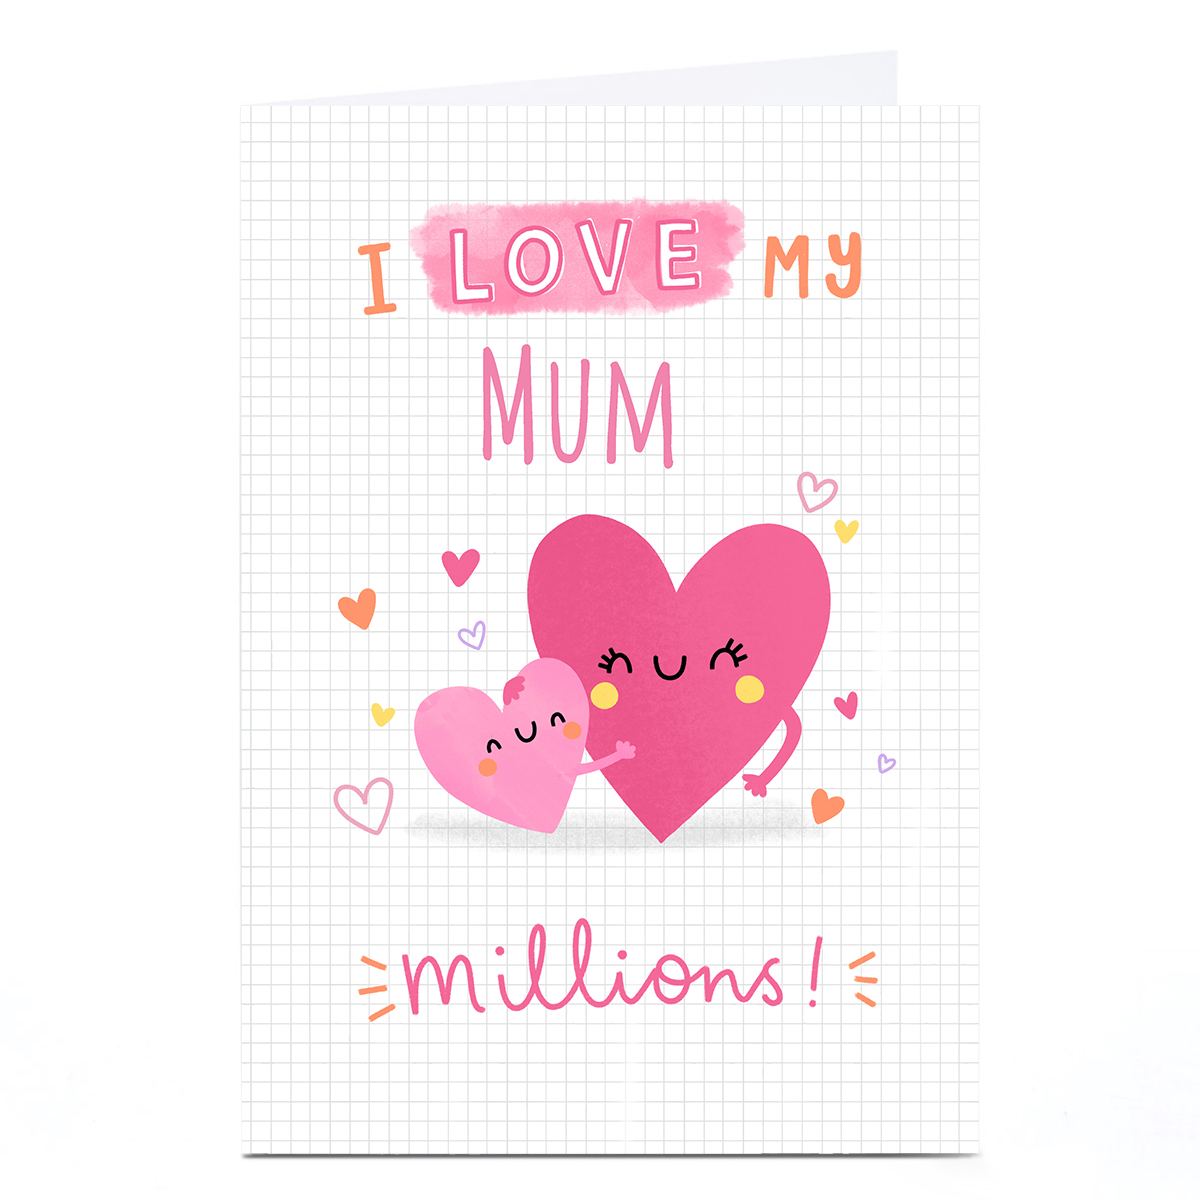 Personalised Jess Moorhouse Mother's Day Card - Heart Hugs